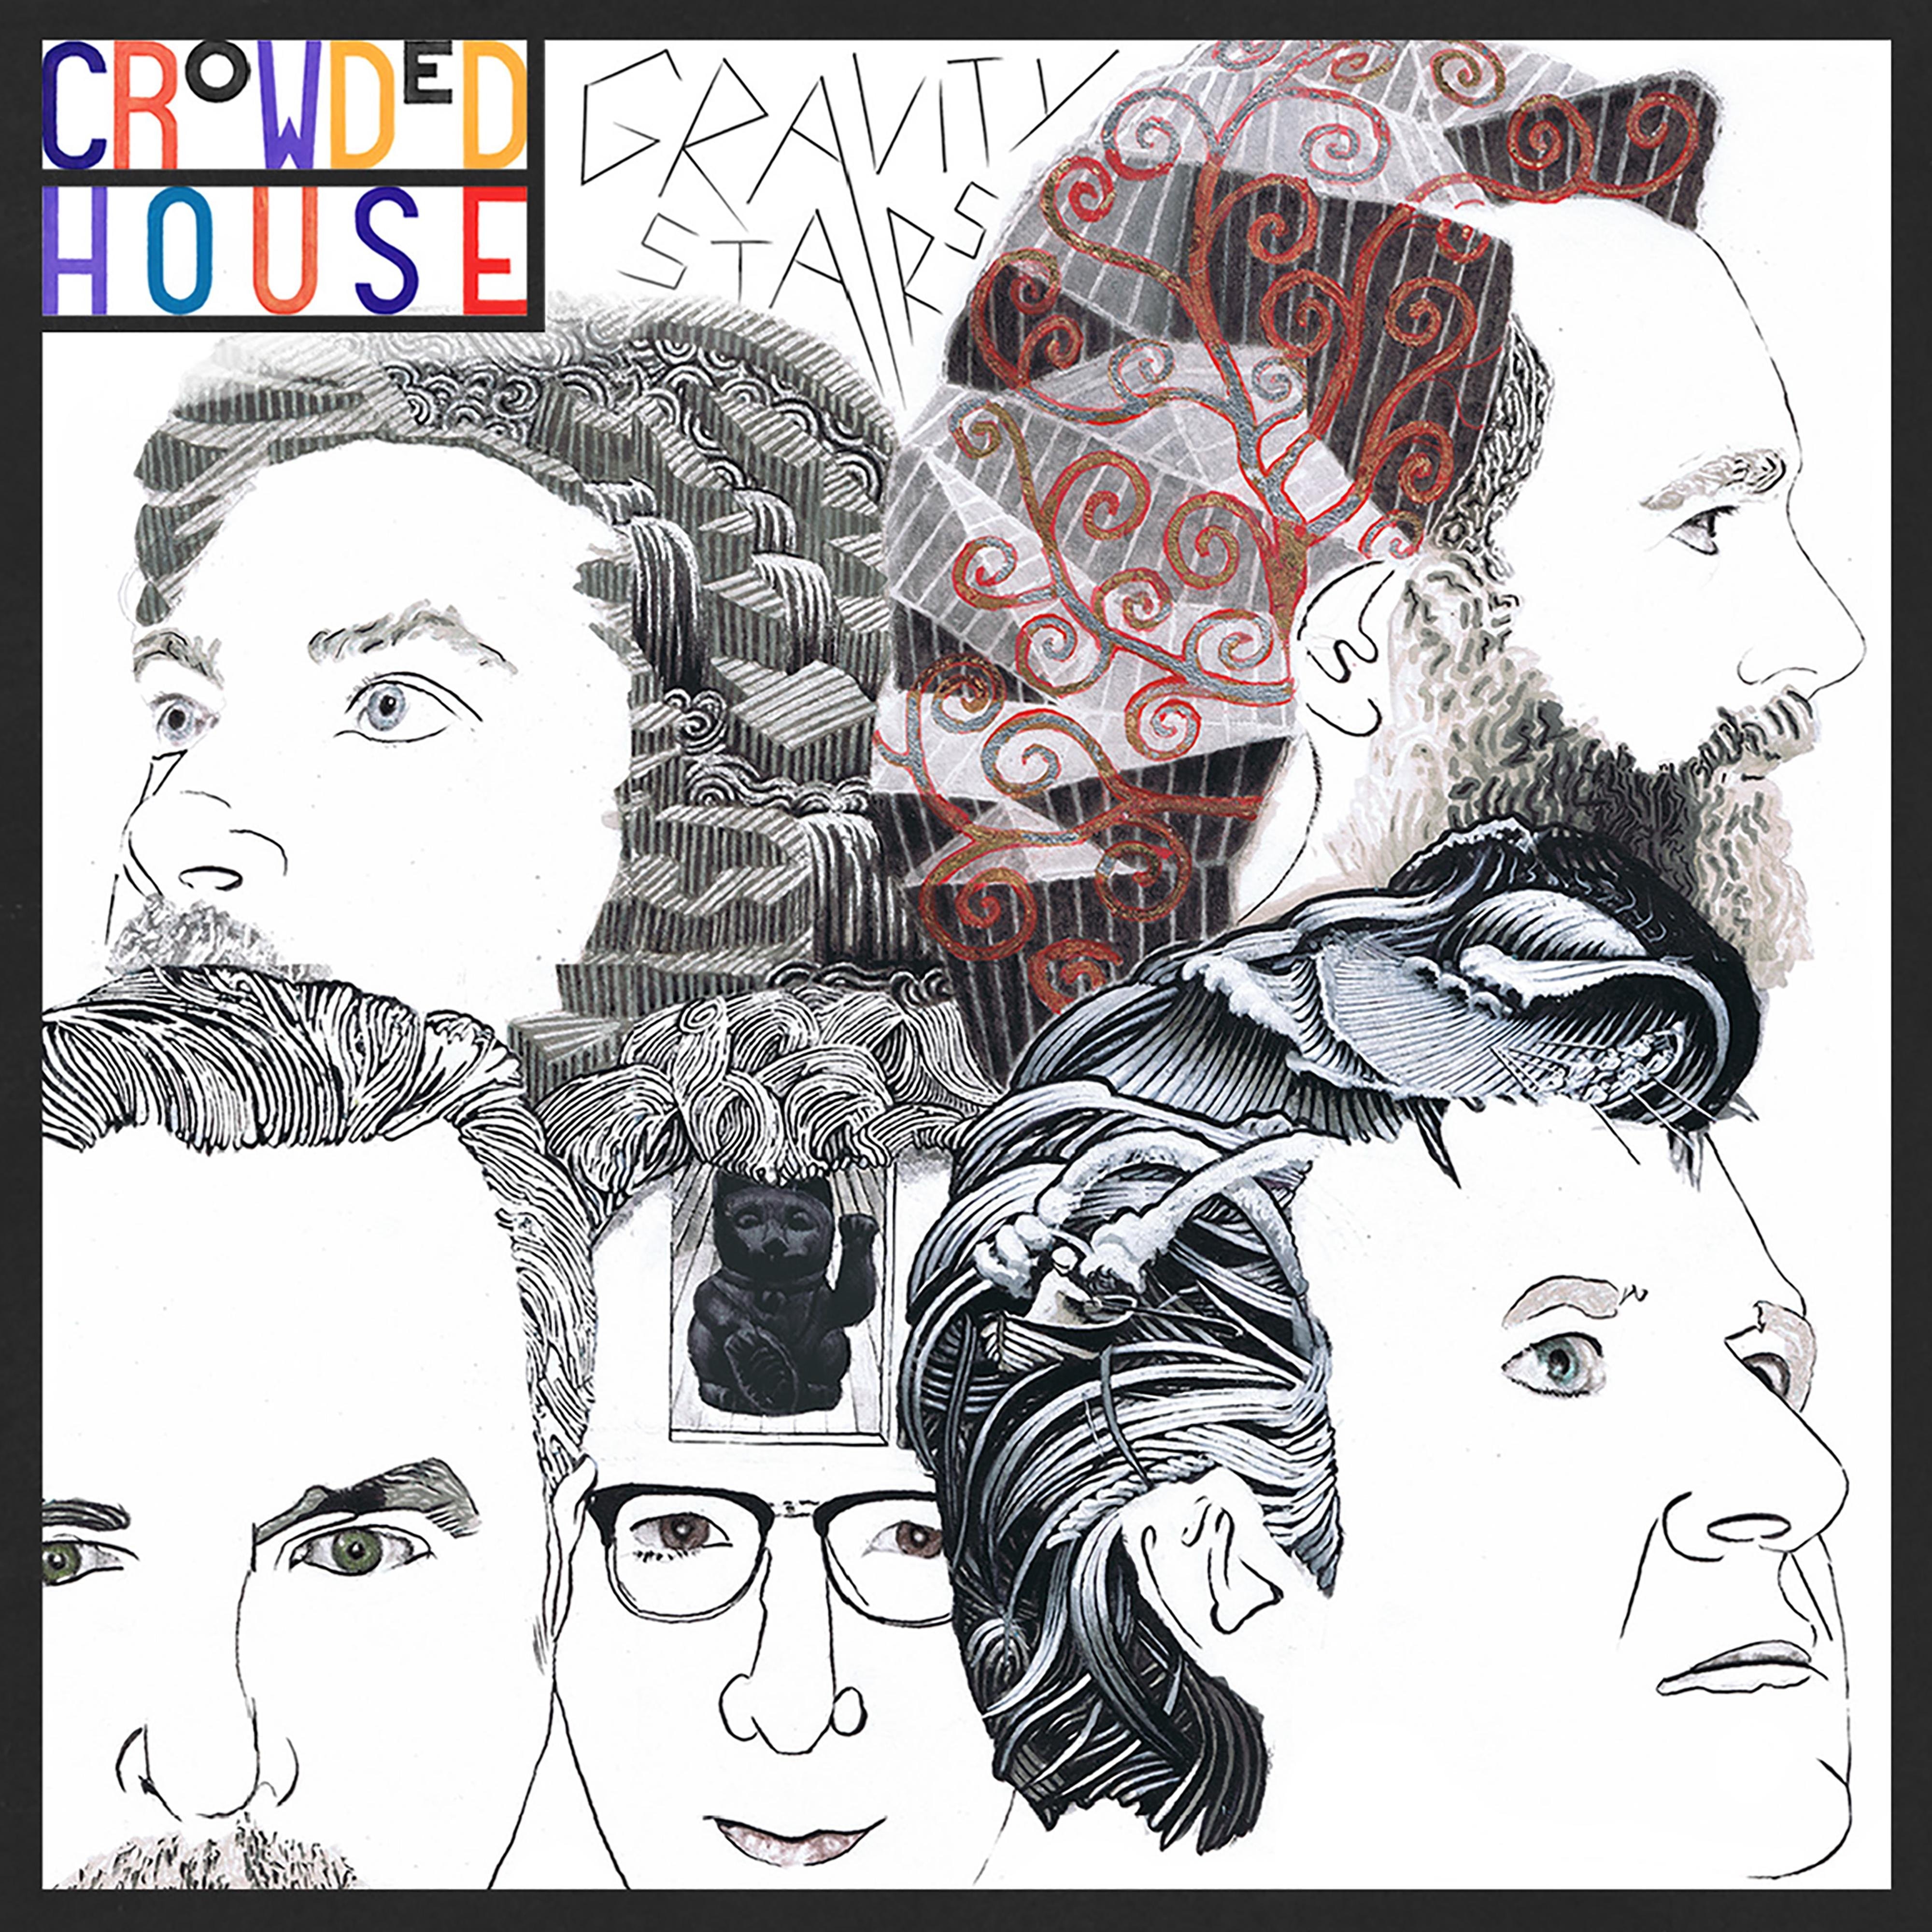 black & white illustration of Crowded House bandmates' heads and textured hair with coloured text: Crowded House Gravity Stairs